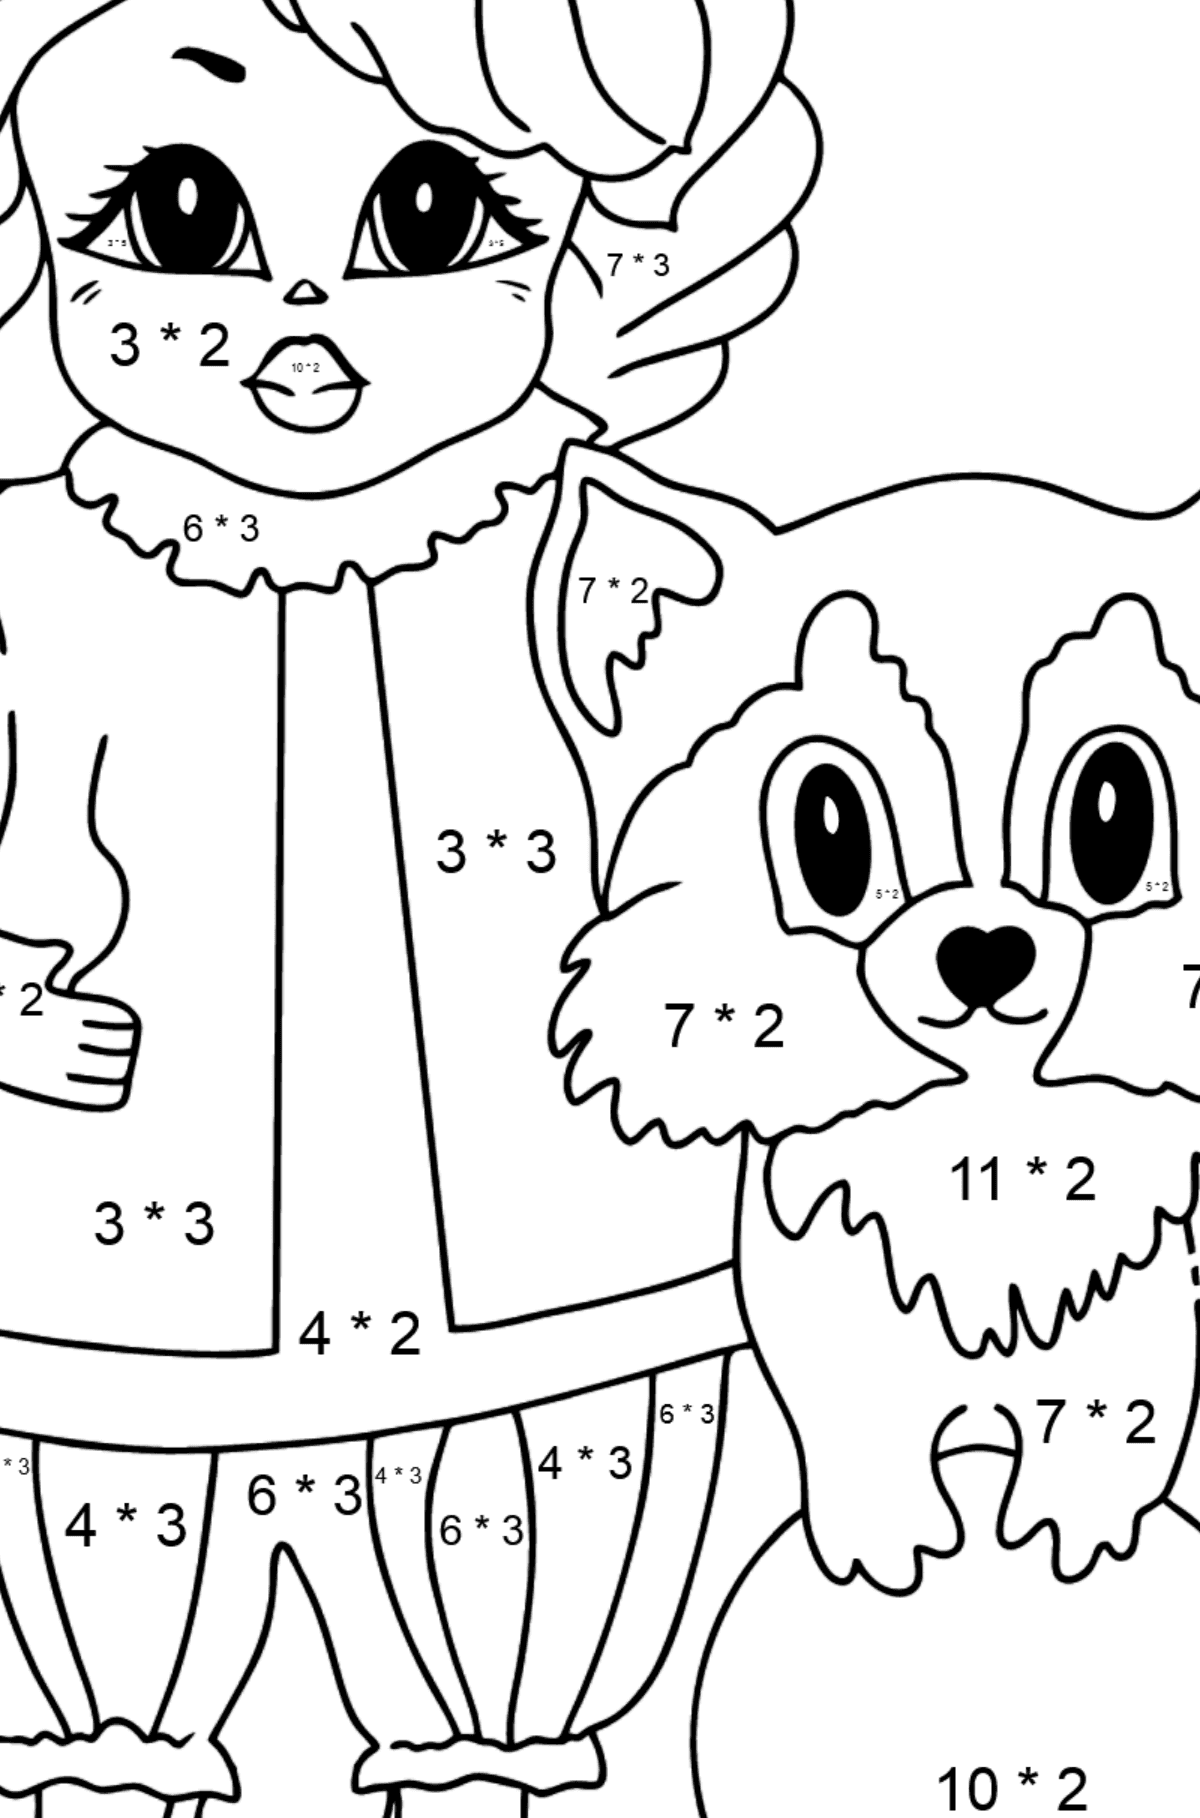 Coloring Page - A Princess with a Cat and a Racoon - Math Coloring - Multiplication for Kids